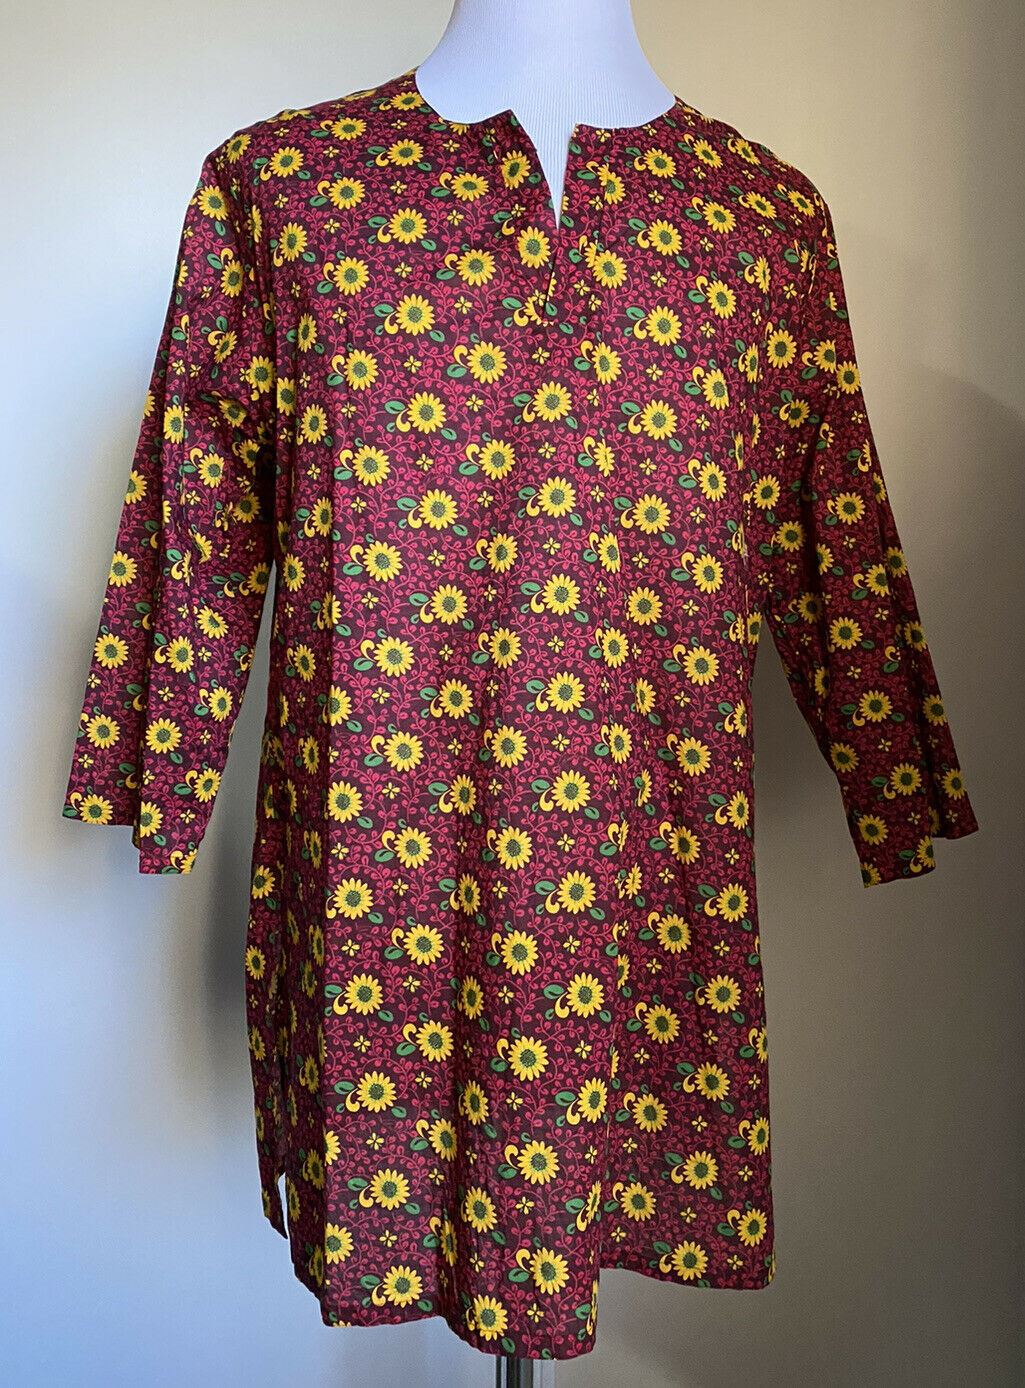 New Gucci Sunflower on Mublin Shirt Yellow/Red Size XL ( 52 Eu ) Italy